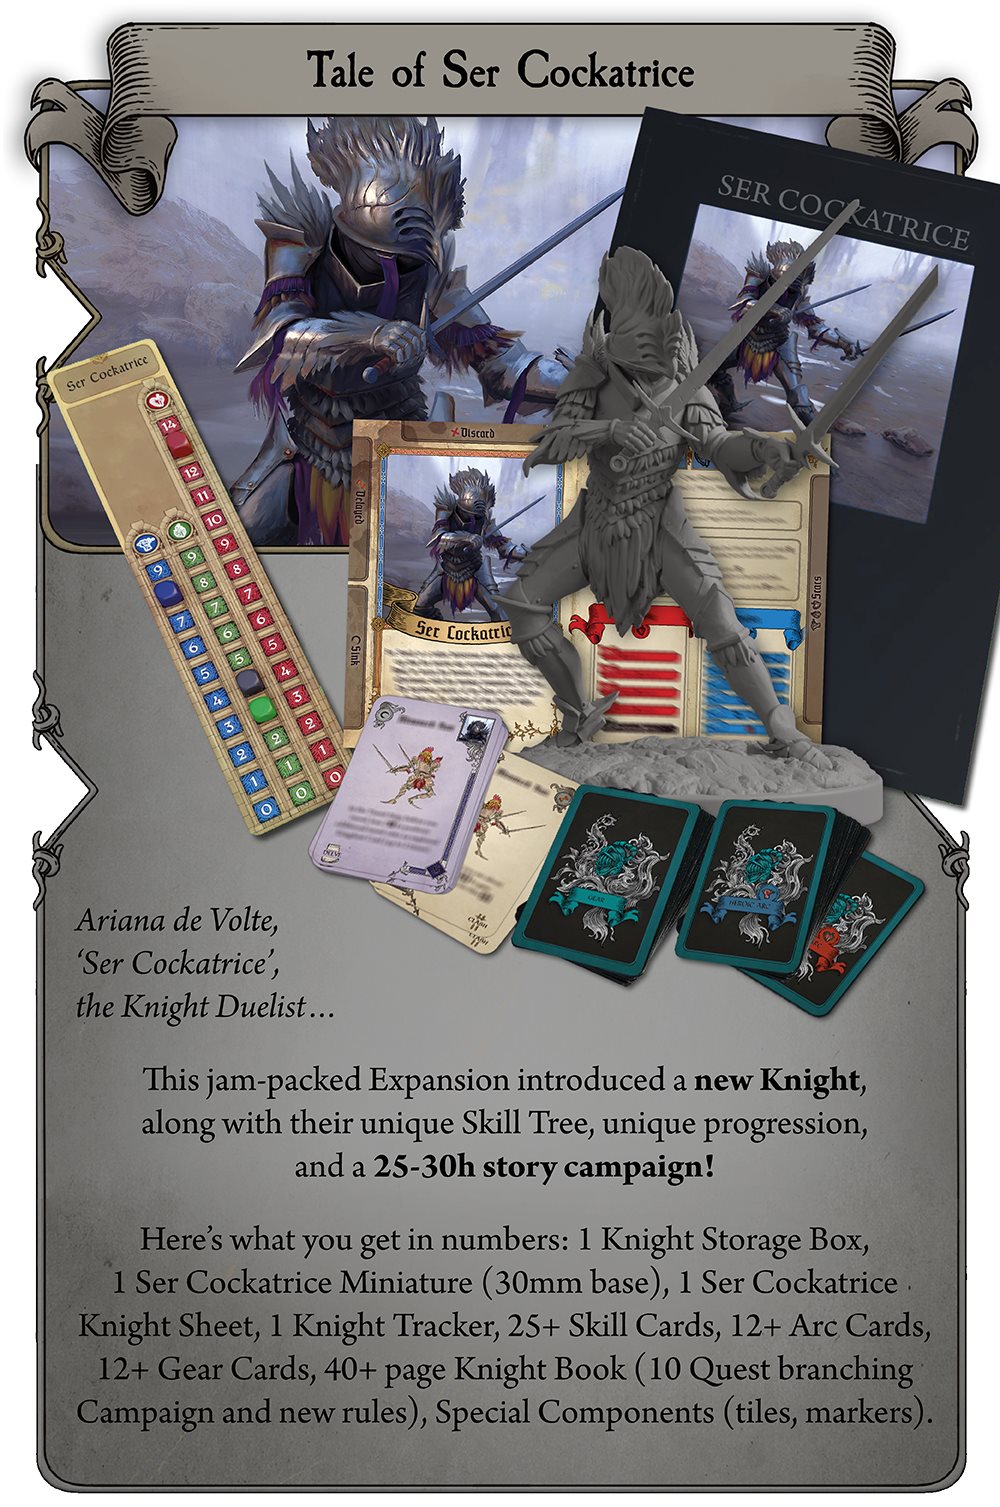 Kingdoms Forlorn: Dragons, Devils and Kings Tale of Ser Cockatrice Knight Expansion + Stretchgoals + KS Exclusive English